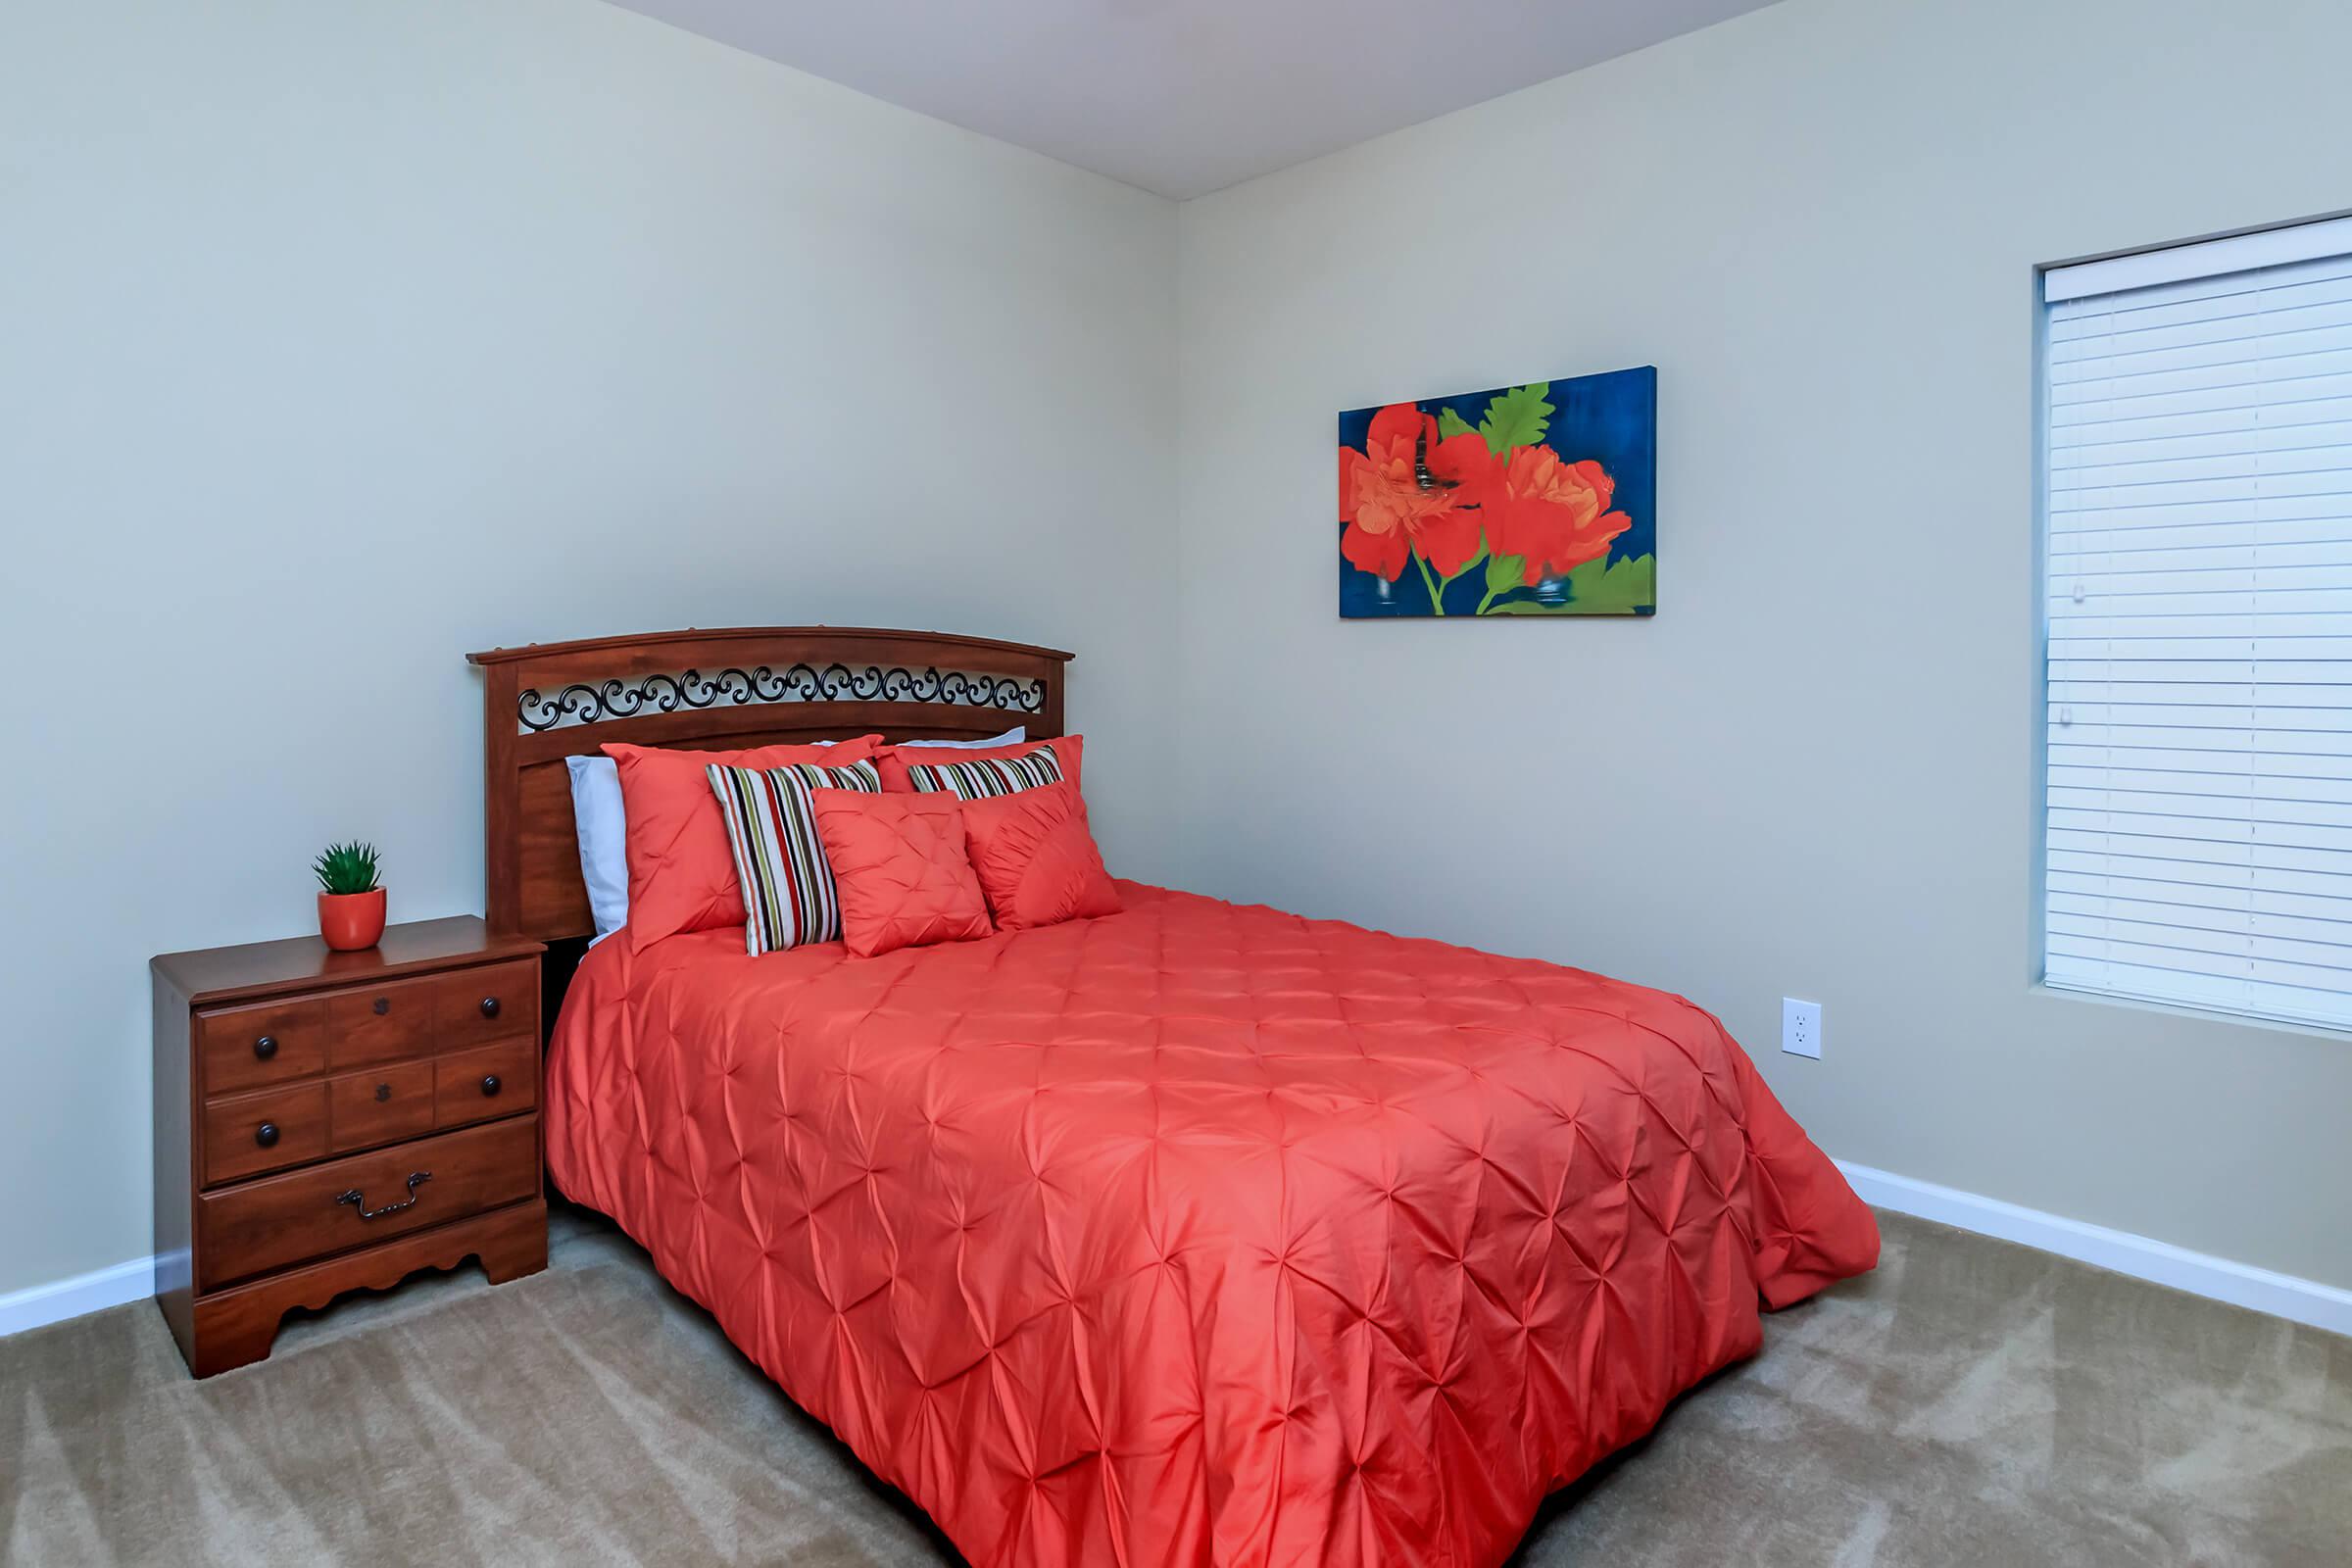 Bedroom with carpeted floors at Eagles Crest at Jack Miller in Clarksville, Tennessee